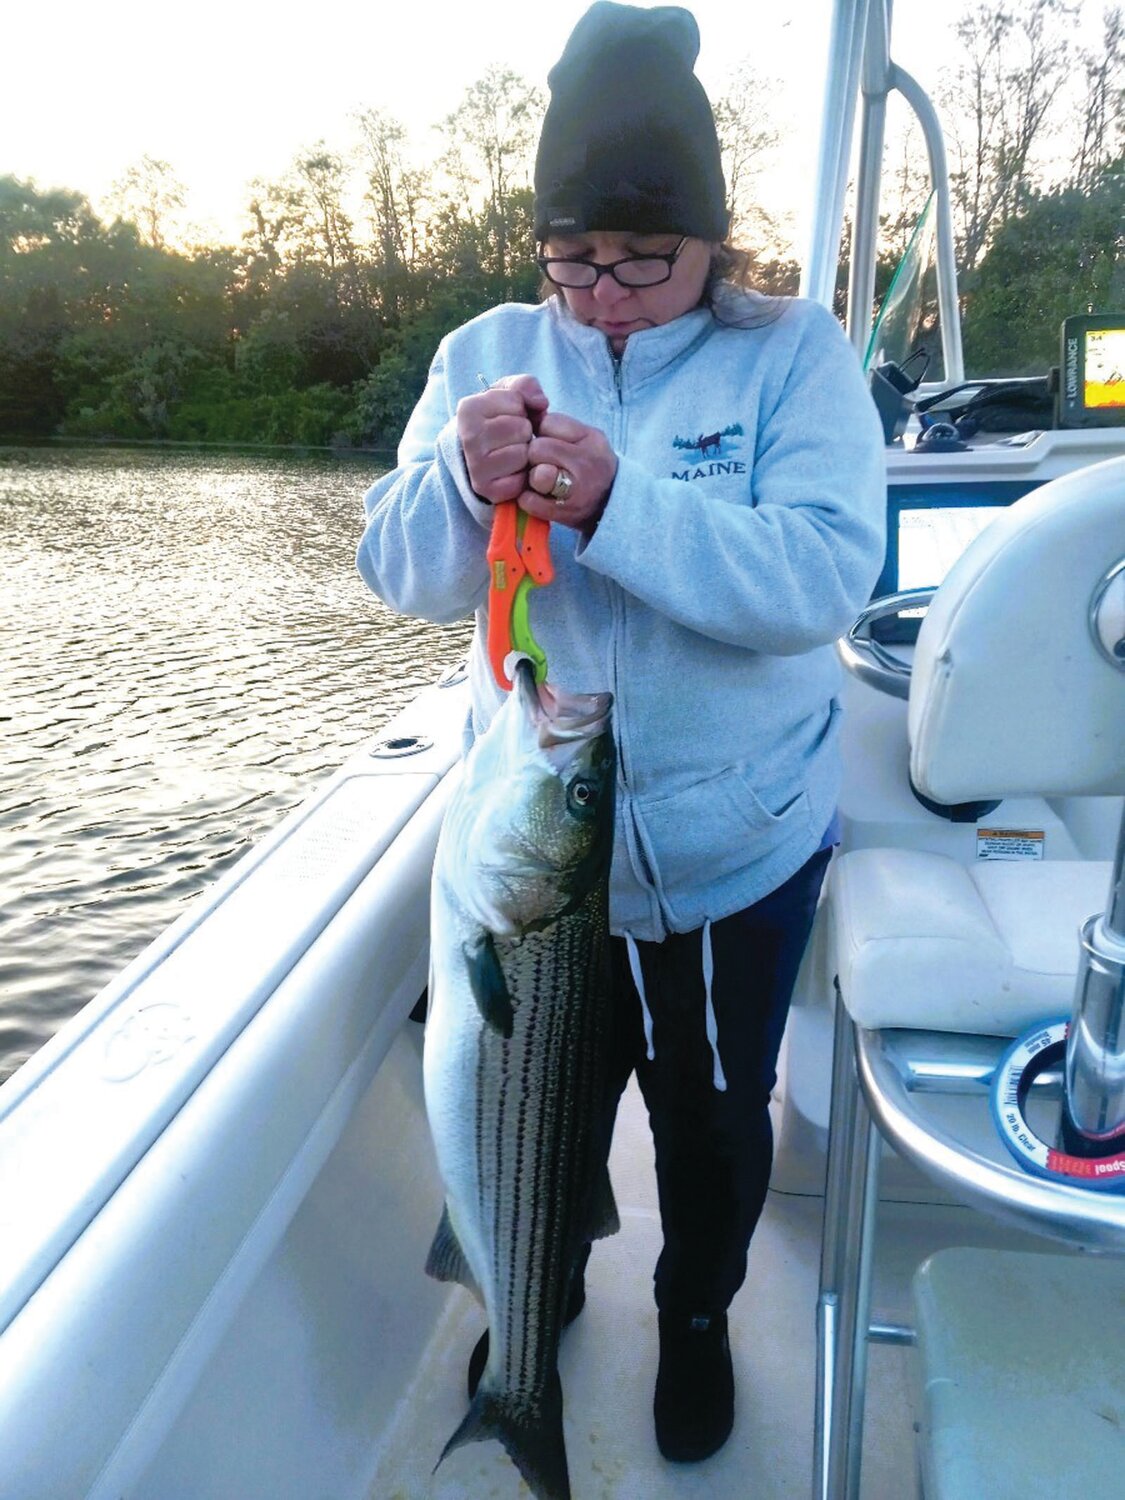 STRIPED BASS: Rhonda Swain with striped bass she caught when fishing with her husband Mike live lining Atlantic menhaden at night in Bristol Harbor.